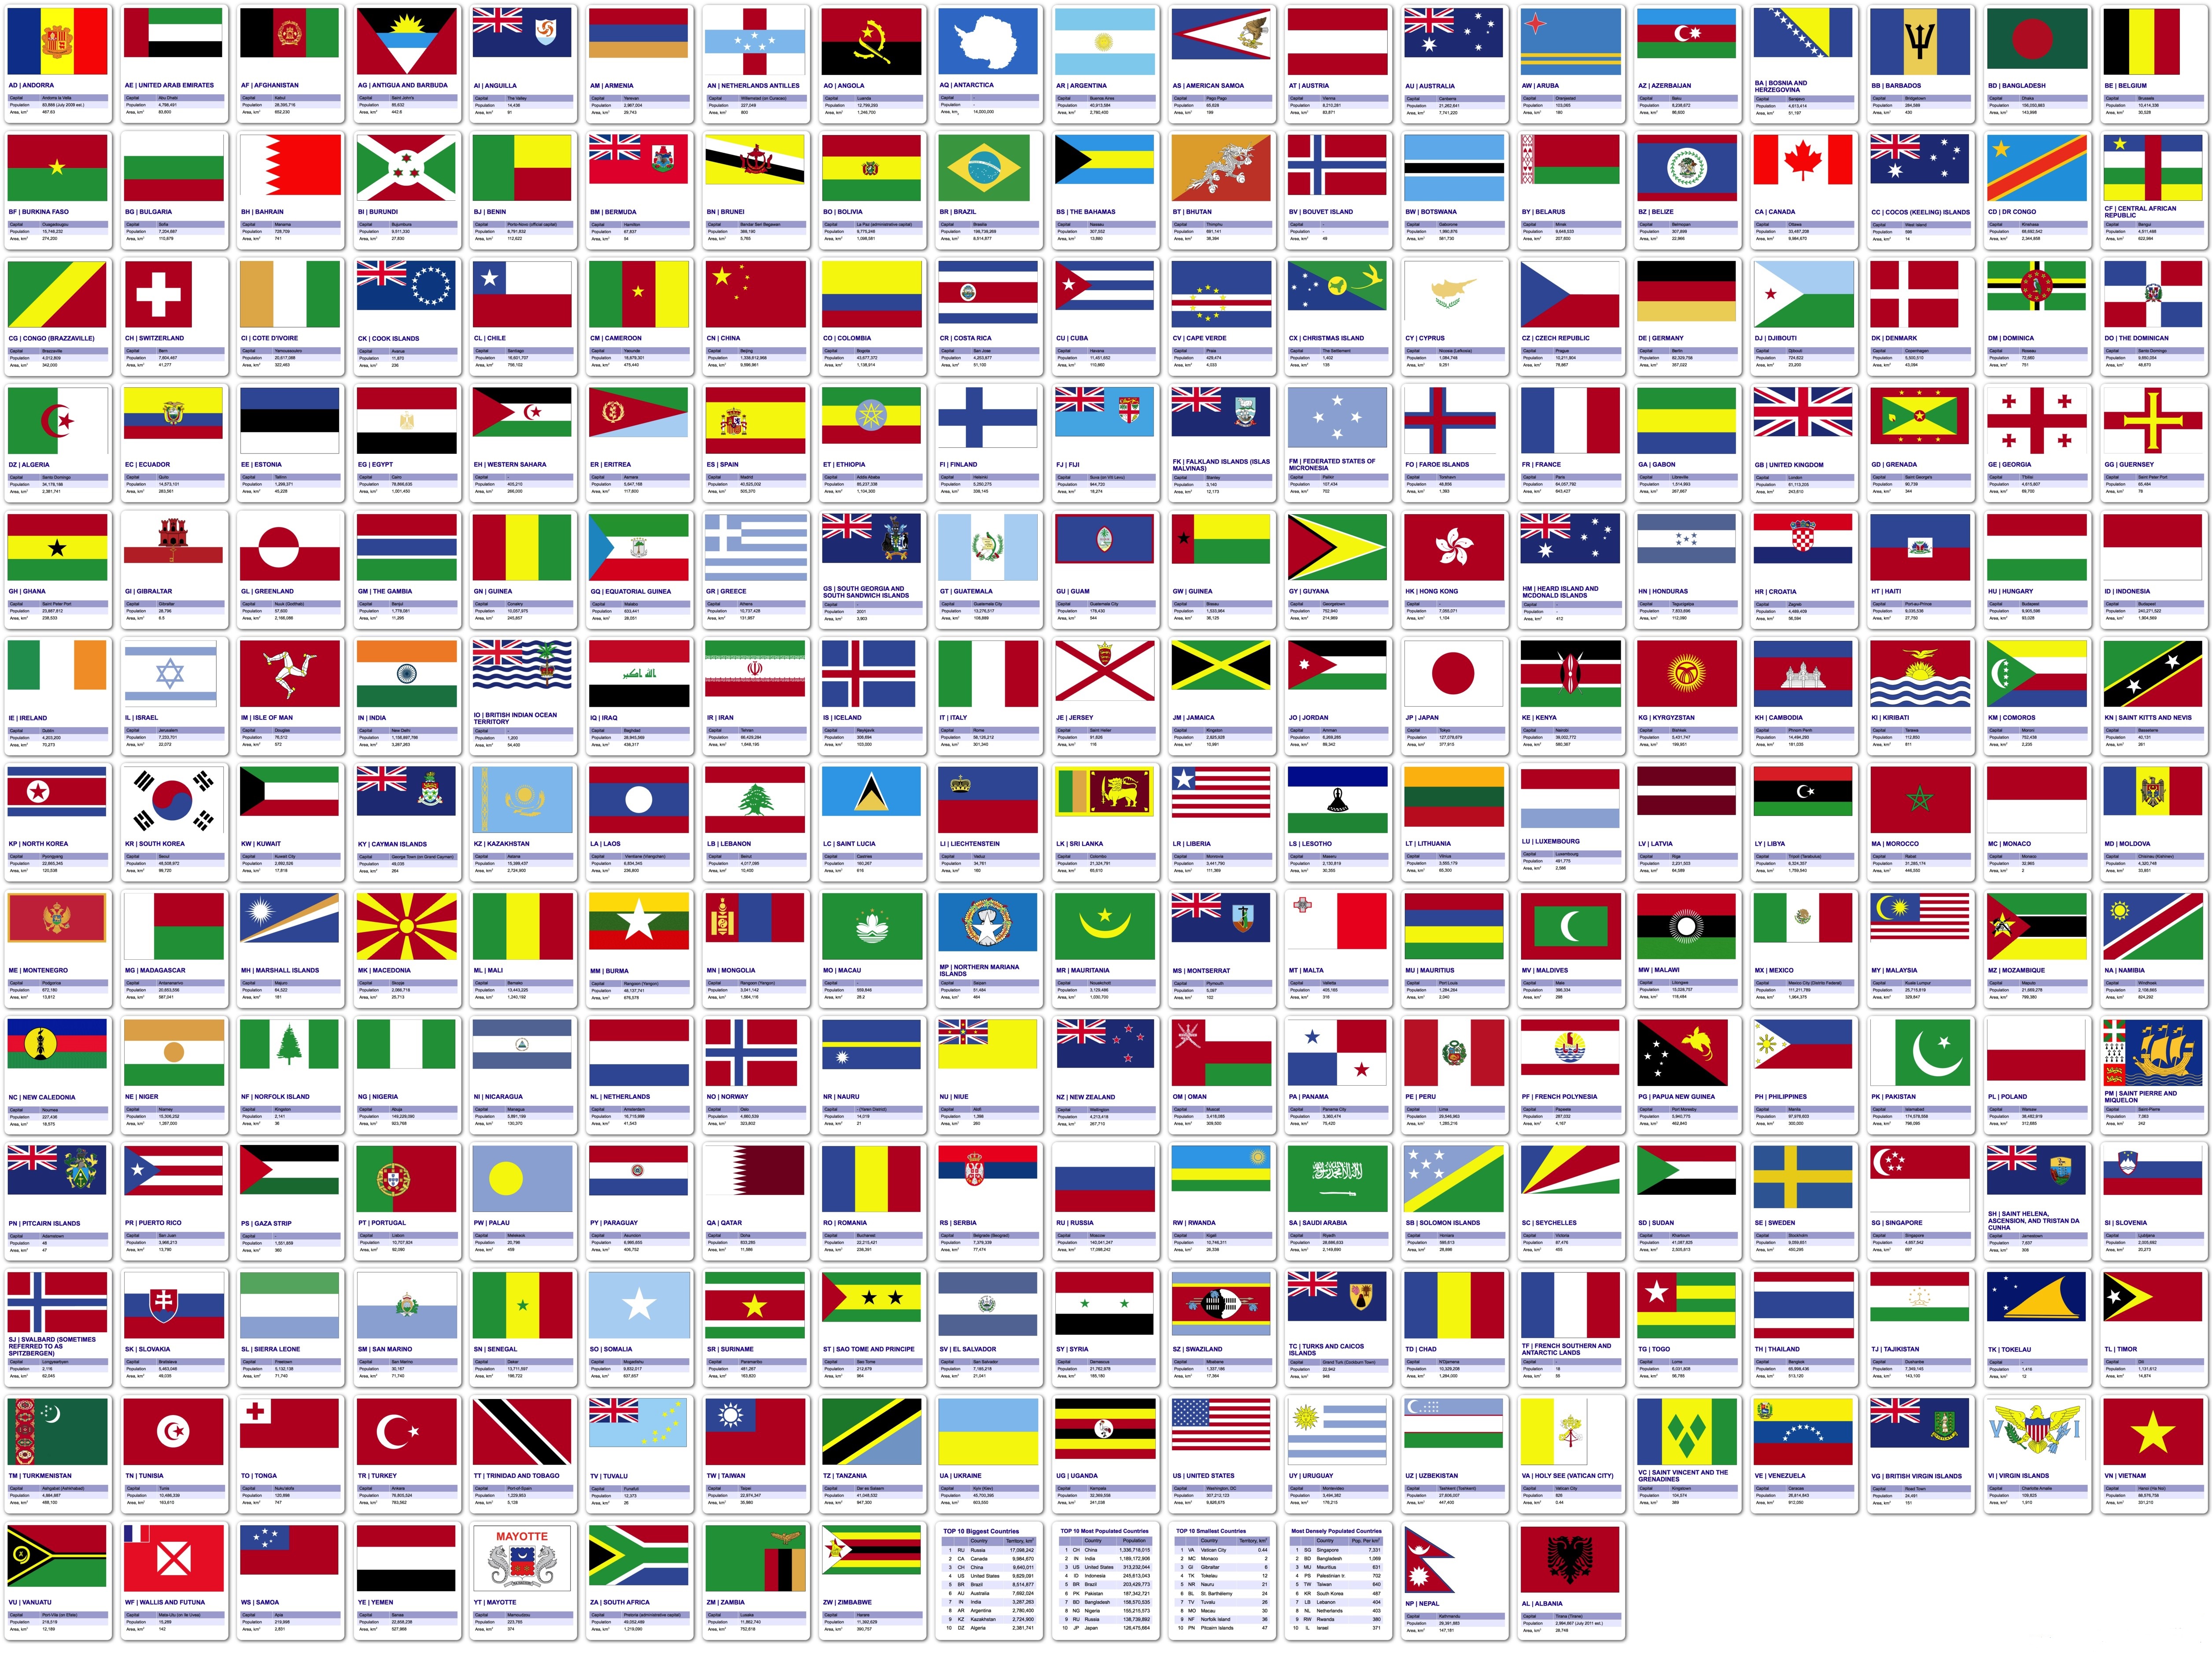 World Flags World Maps Map Pictures